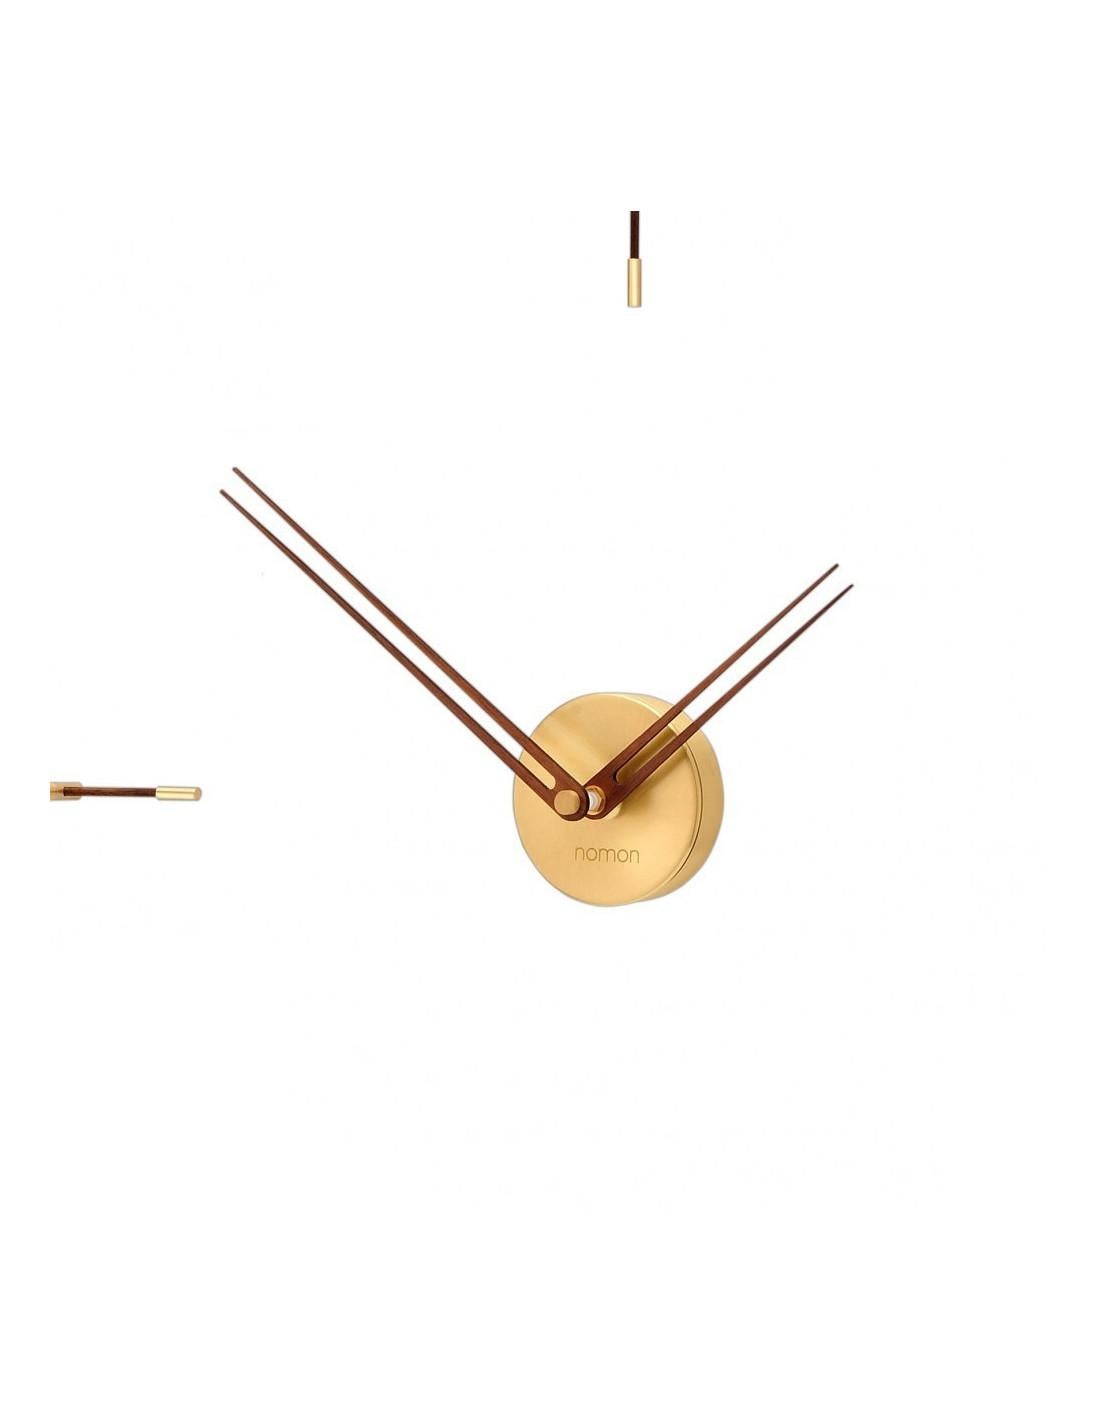 The Merlin mini 4 gold N stands out among all modern wall clocks thanks to its walnut needles reinforced with golden counterweights to which we must add its 4 elegant time points with a beautiful polished brass and wood finish with walnut.
Mini